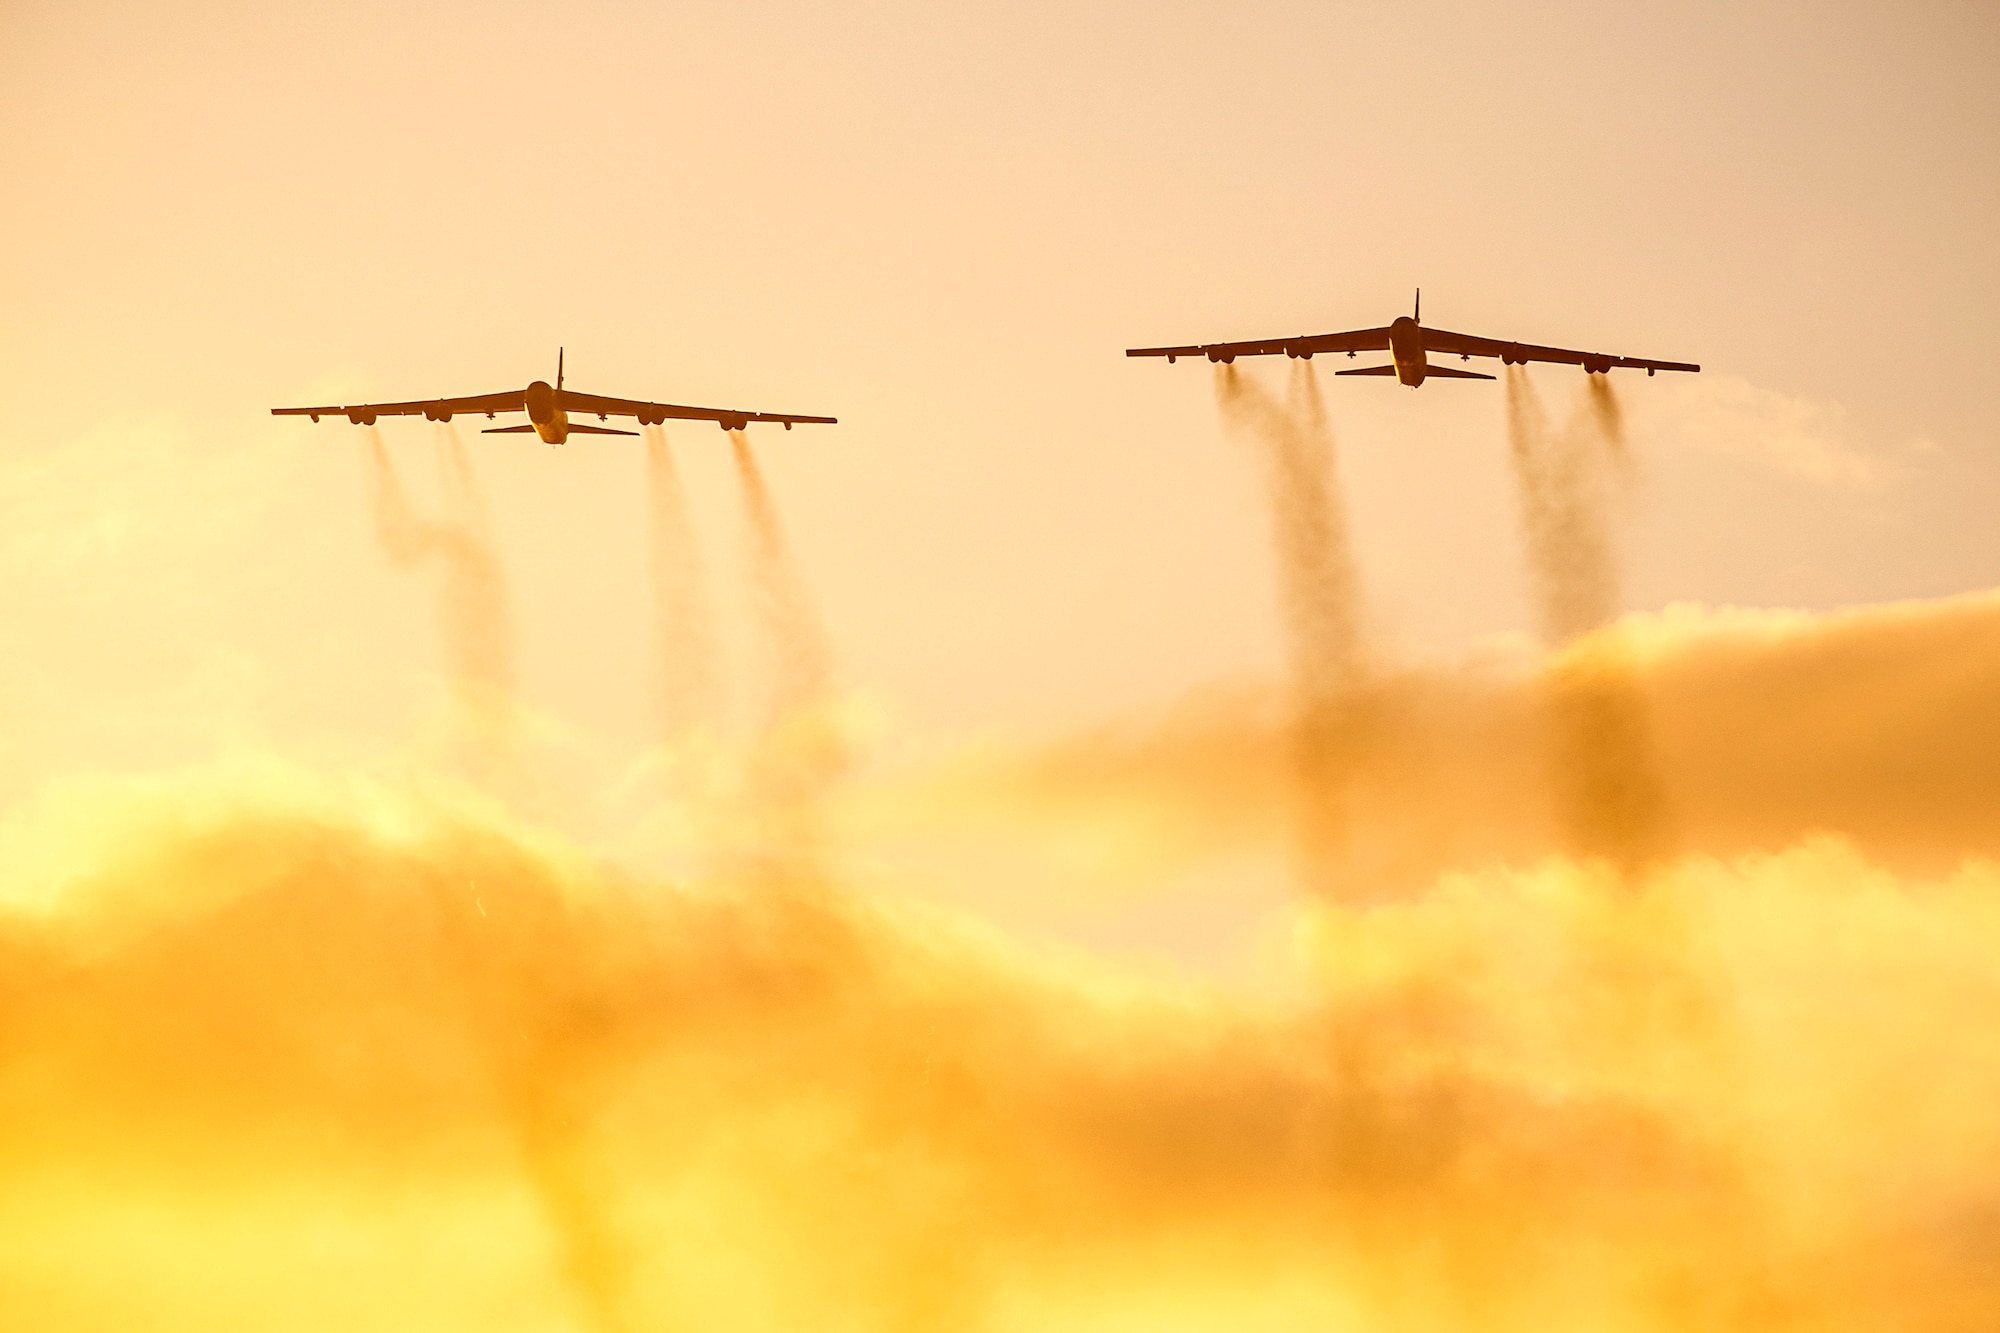 Two B-52 Stratofortresses fly over Royal Air Force Station Fairford, United Kingdom, Aug. 22, 2020. Strategic bombers contribute to European theater stability as they are intended to deter conflict and offer a rapid response capability. (U.S. Air Force photo by Senior Airman Eugene Oliver)